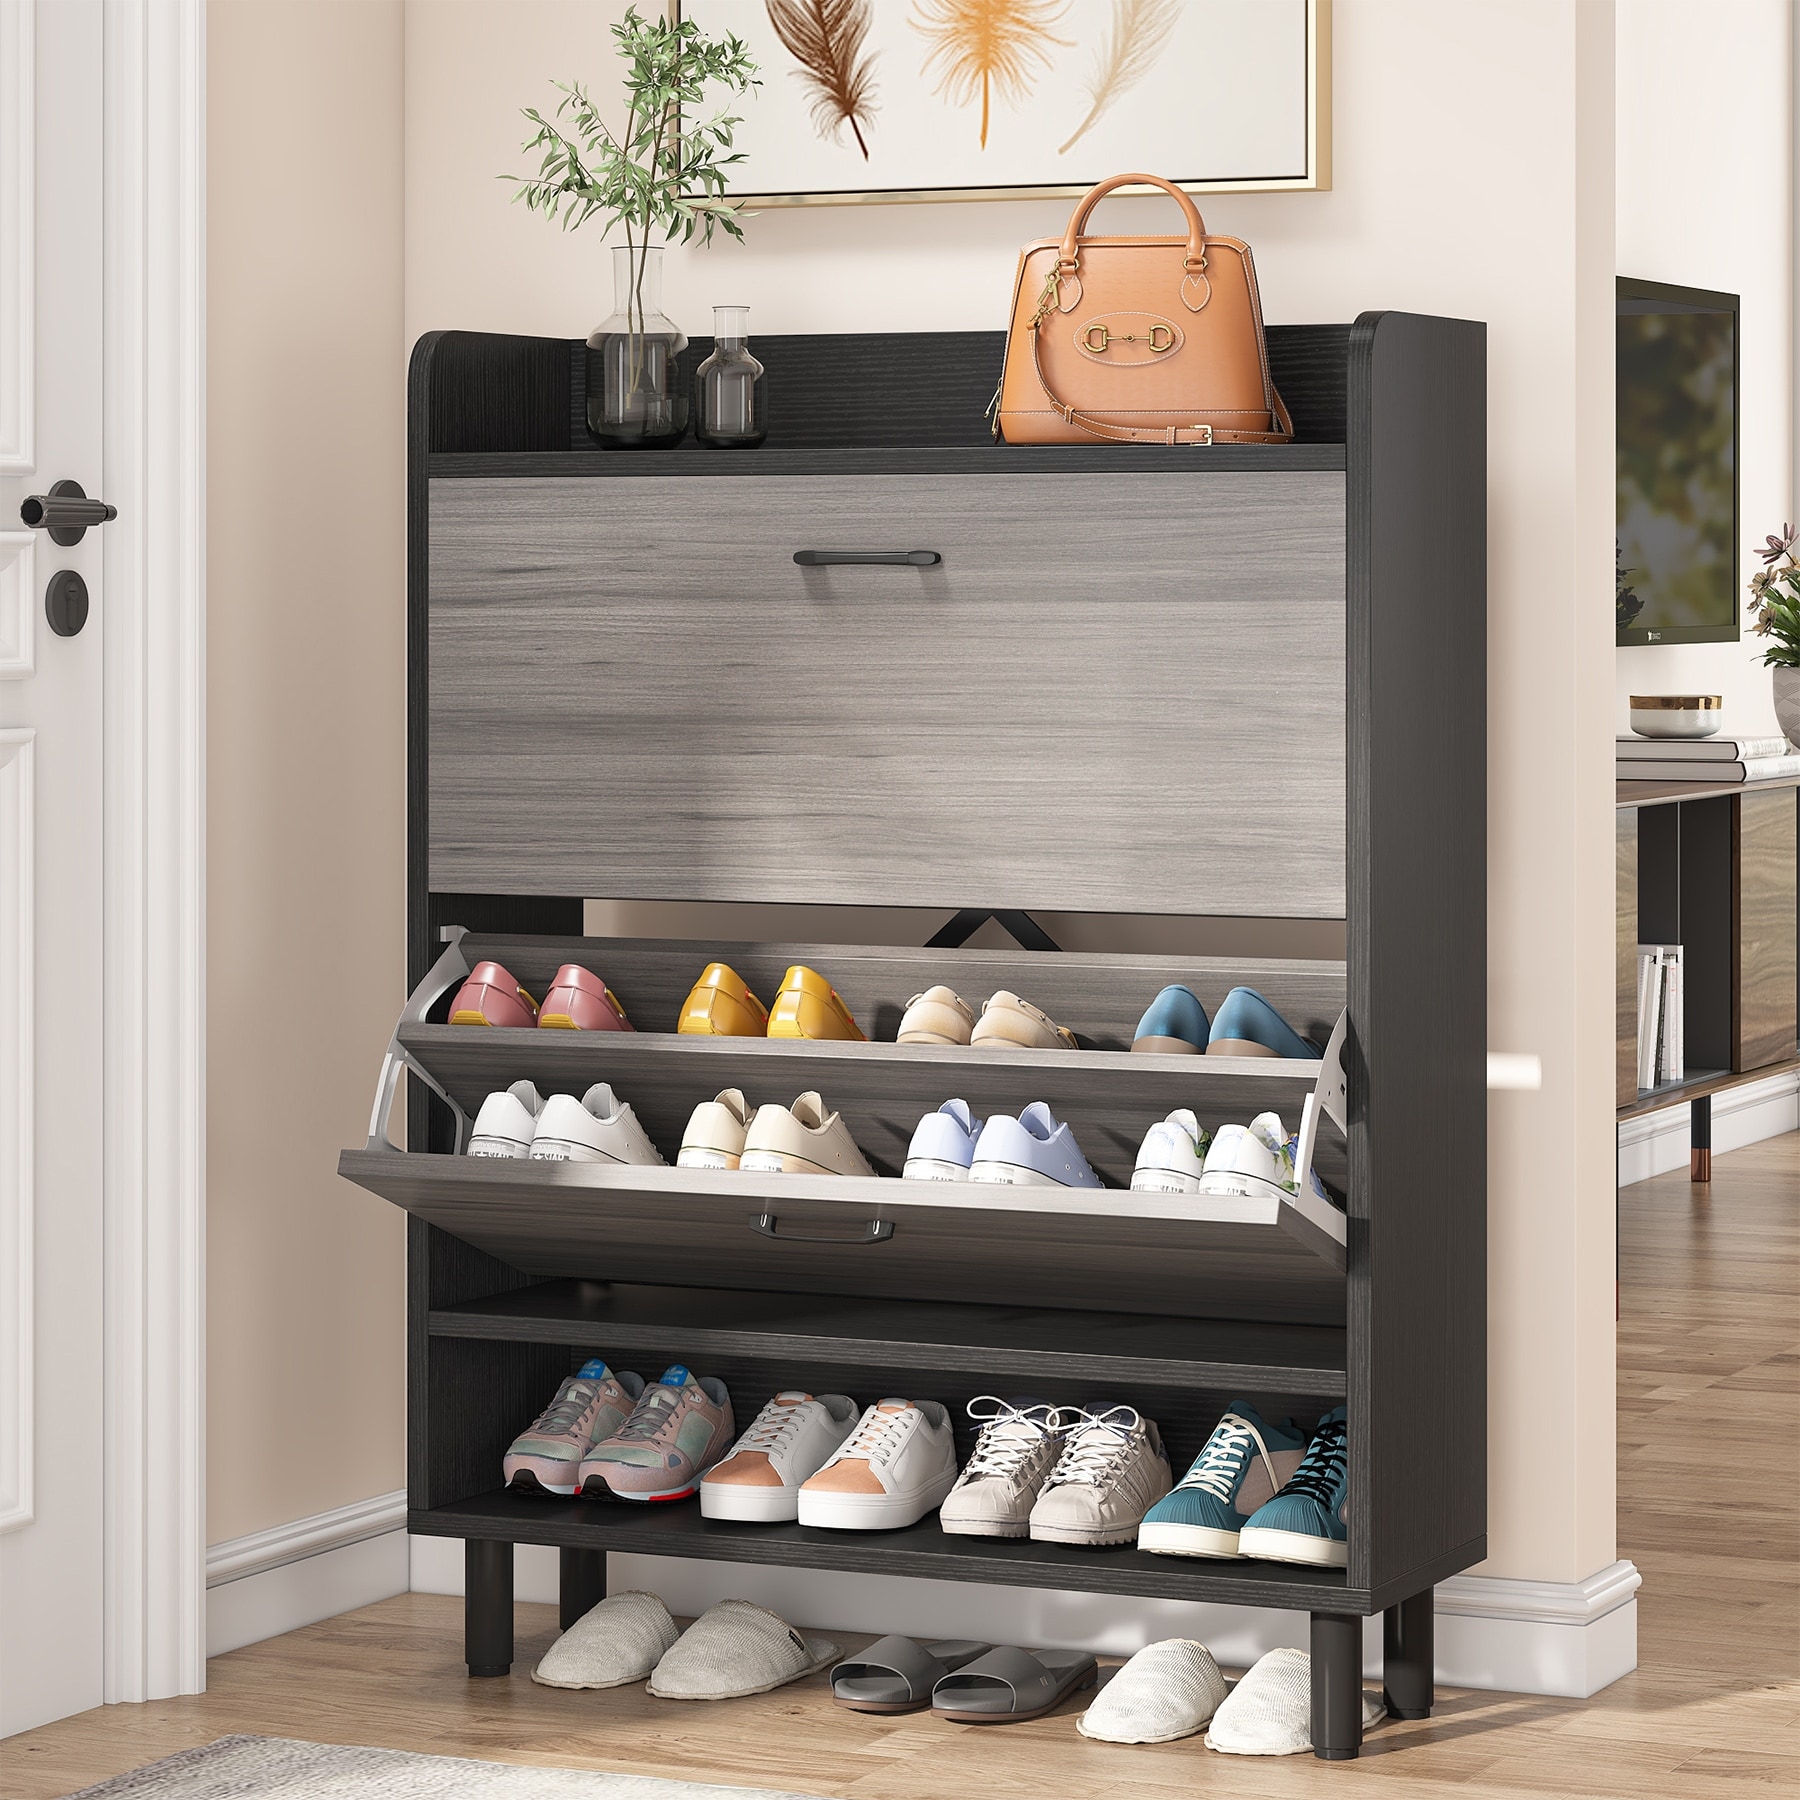 https://ak1.ostkcdn.com/images/products/is/images/direct/2e831565b3749cce682bc3c39555b45e9b2b50b6/Shoe-Storage-Cabinet%2C-24-Pair-Shoe-Storage-with-2-Drawers%2C-Brown-White.jpg